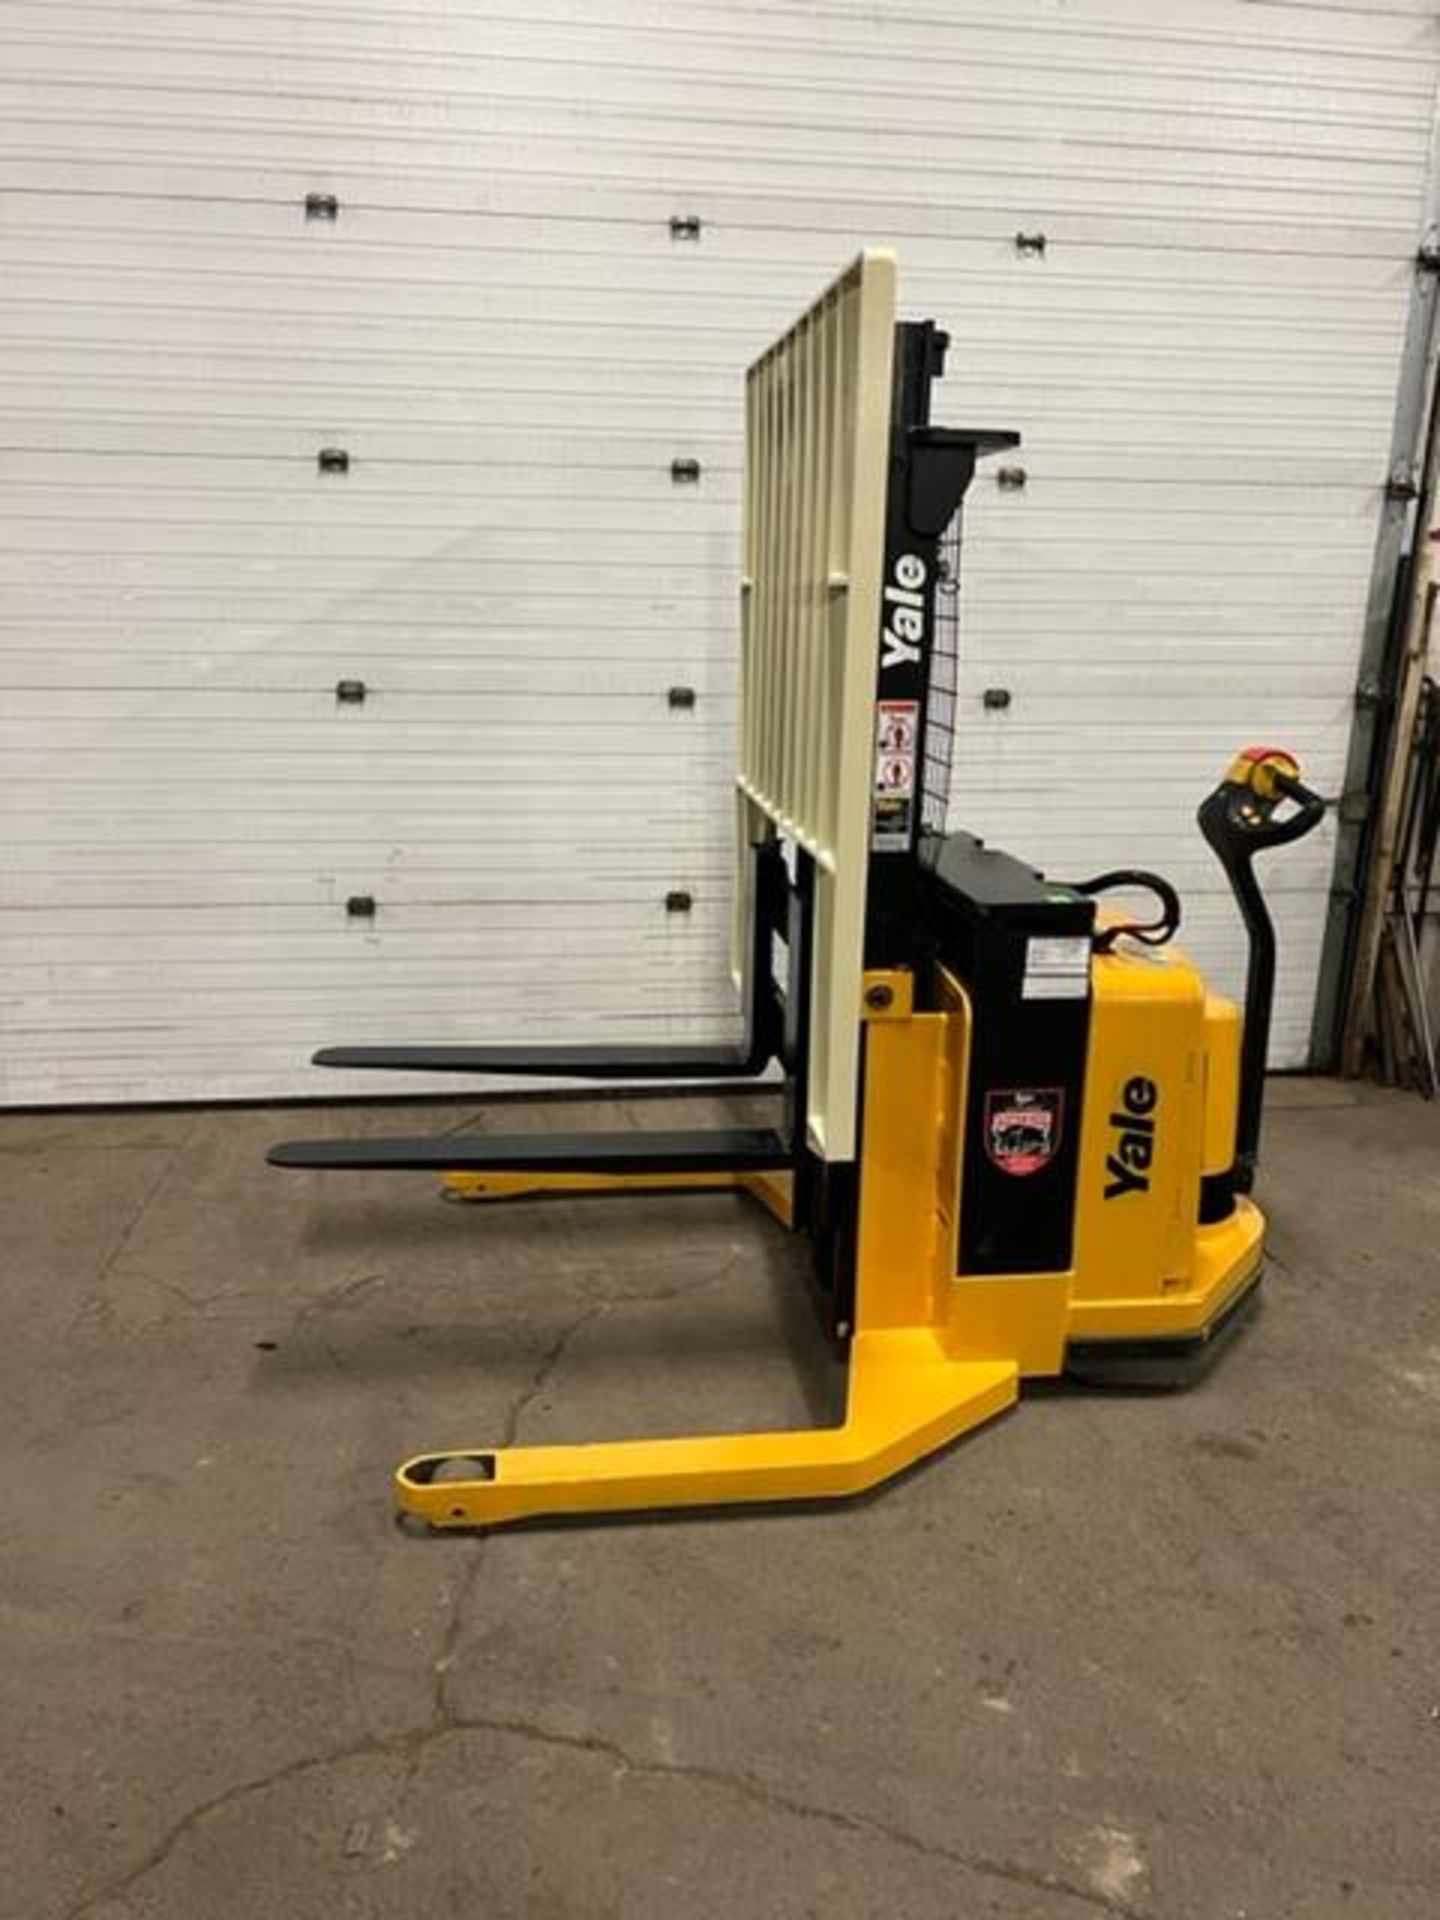 FREE CUSTOMS - 2008 Yale Pallet Stacker Walk Behind 4000lbs capacity electric Powered Pallet Cart